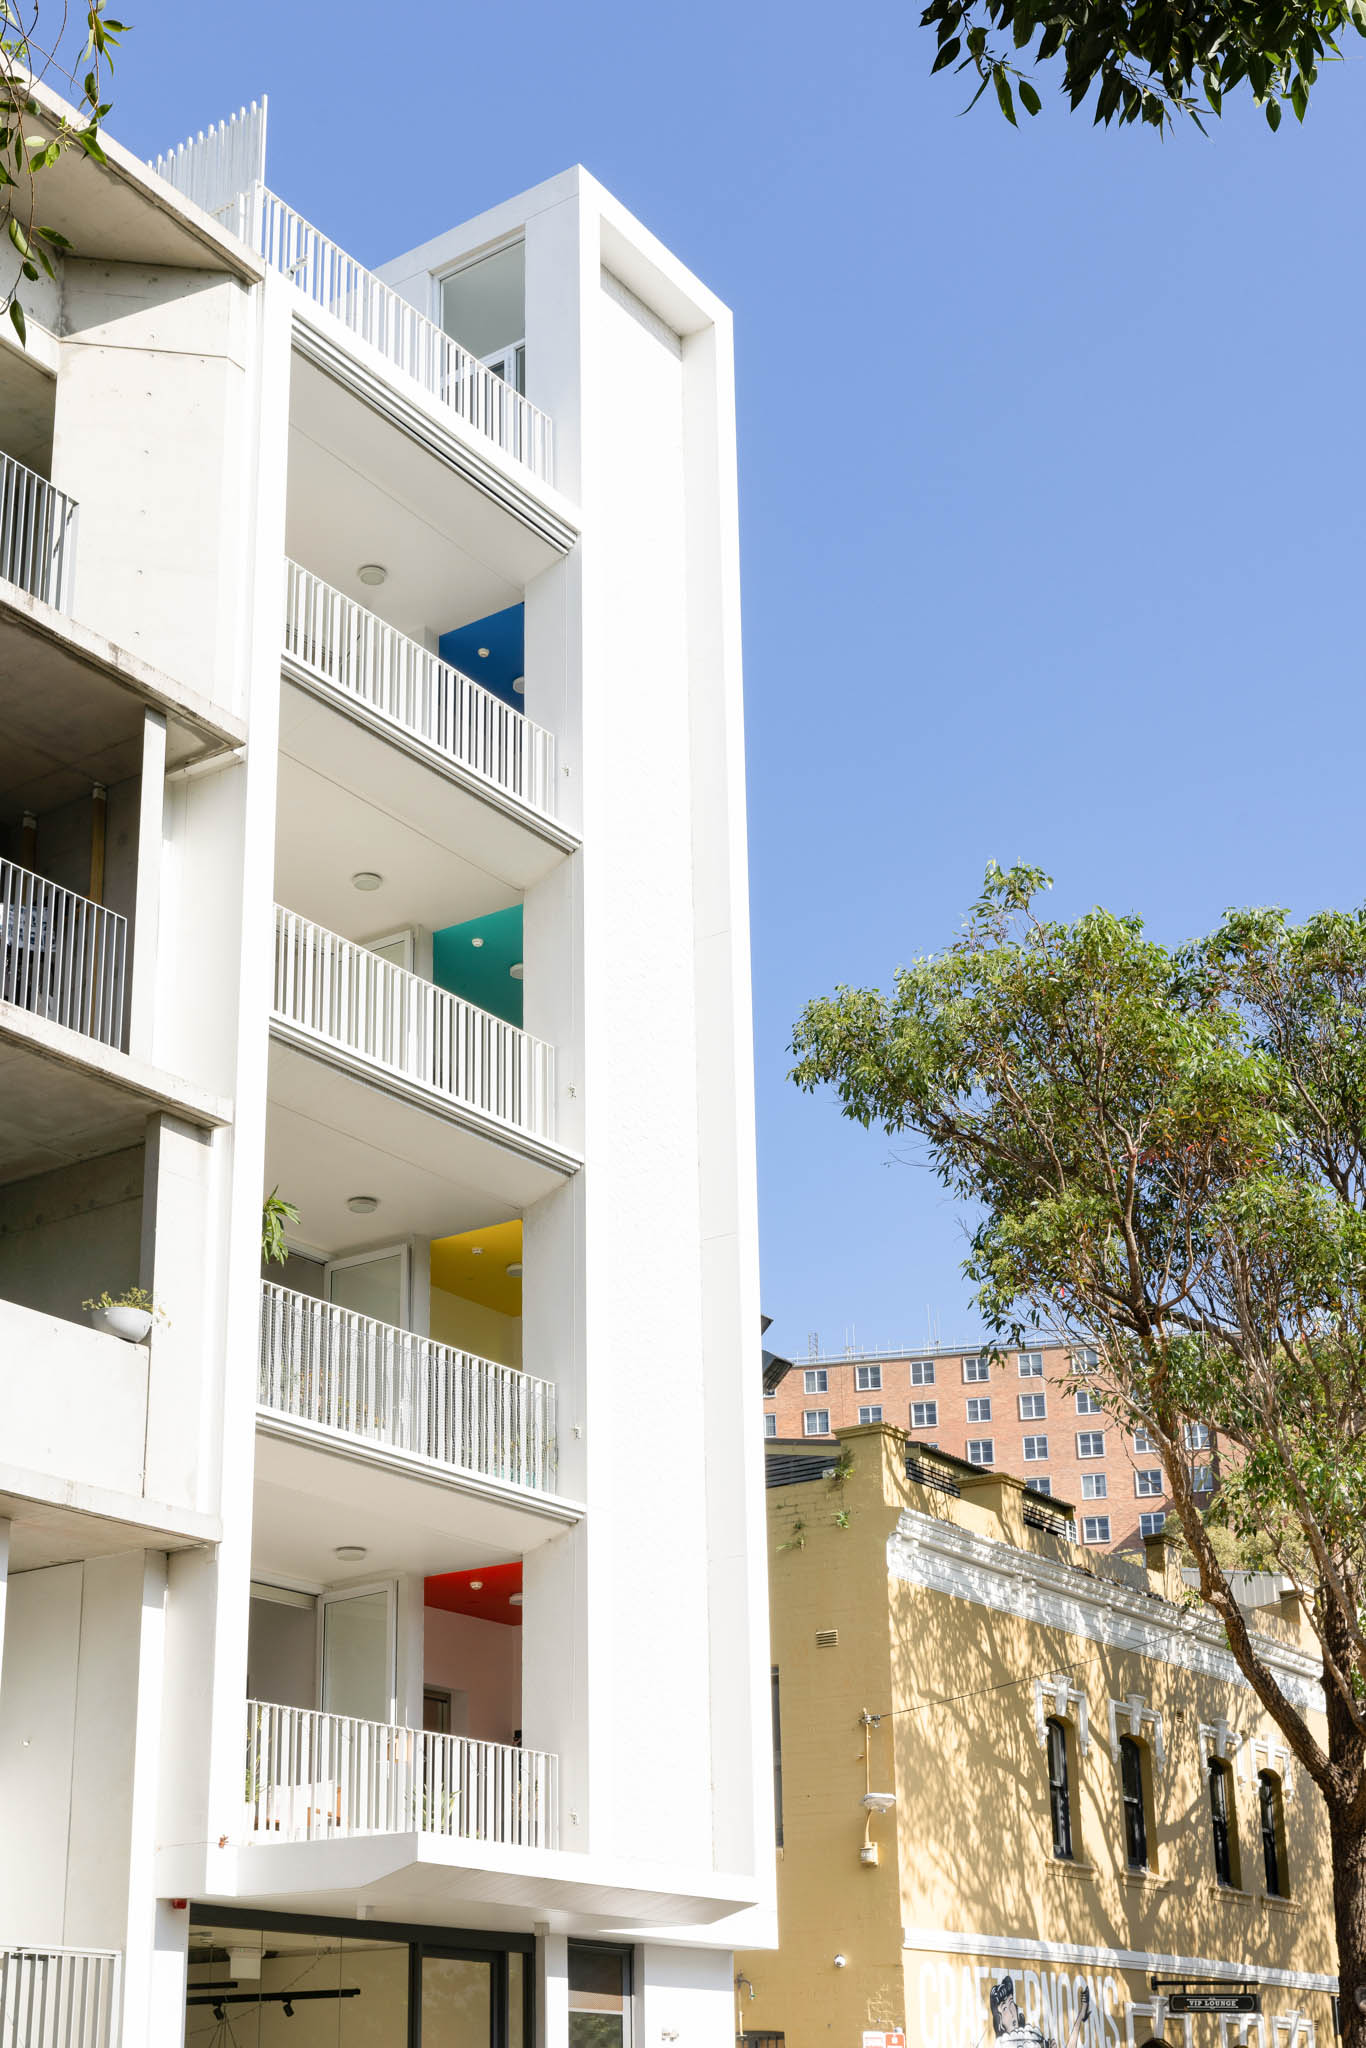 Exterior - One Bedroom Apartment at - The Chromatic Apartments - Urban Rest - Sydney